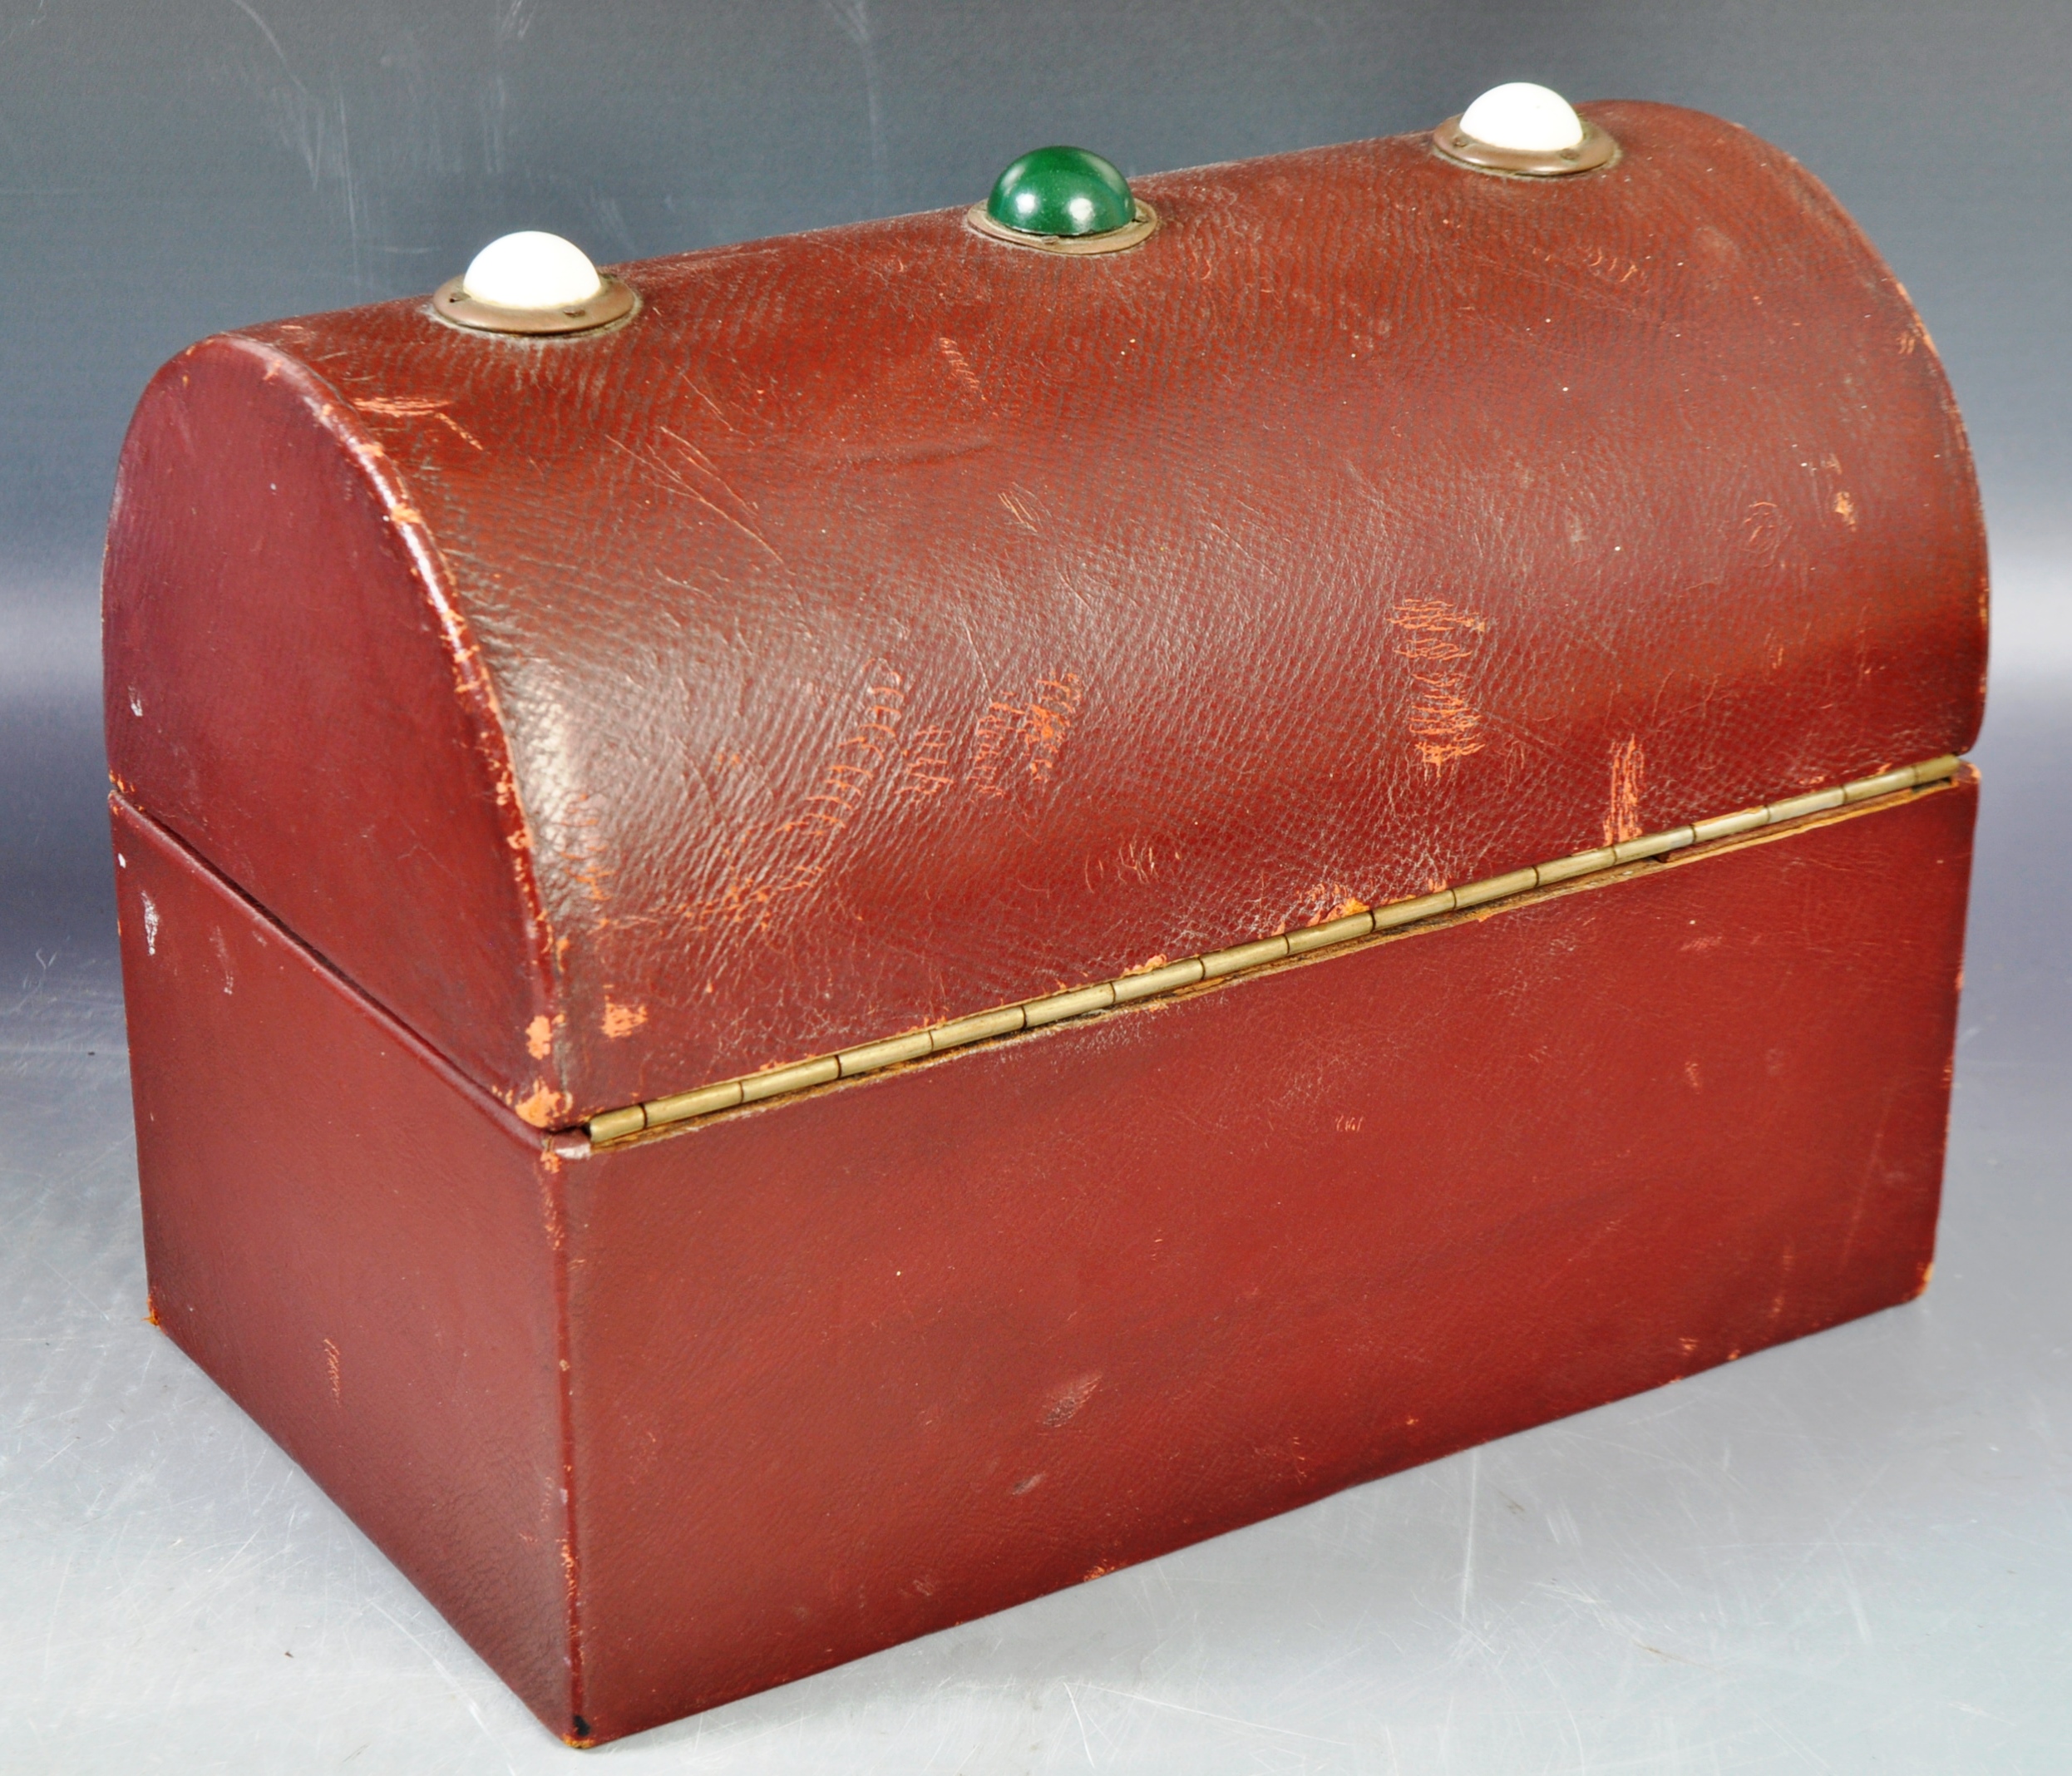 UNUSUAL LEATHER STATIONARY BOX & BLOTTER WITH COLOURED CABOCHONS - Image 4 of 8